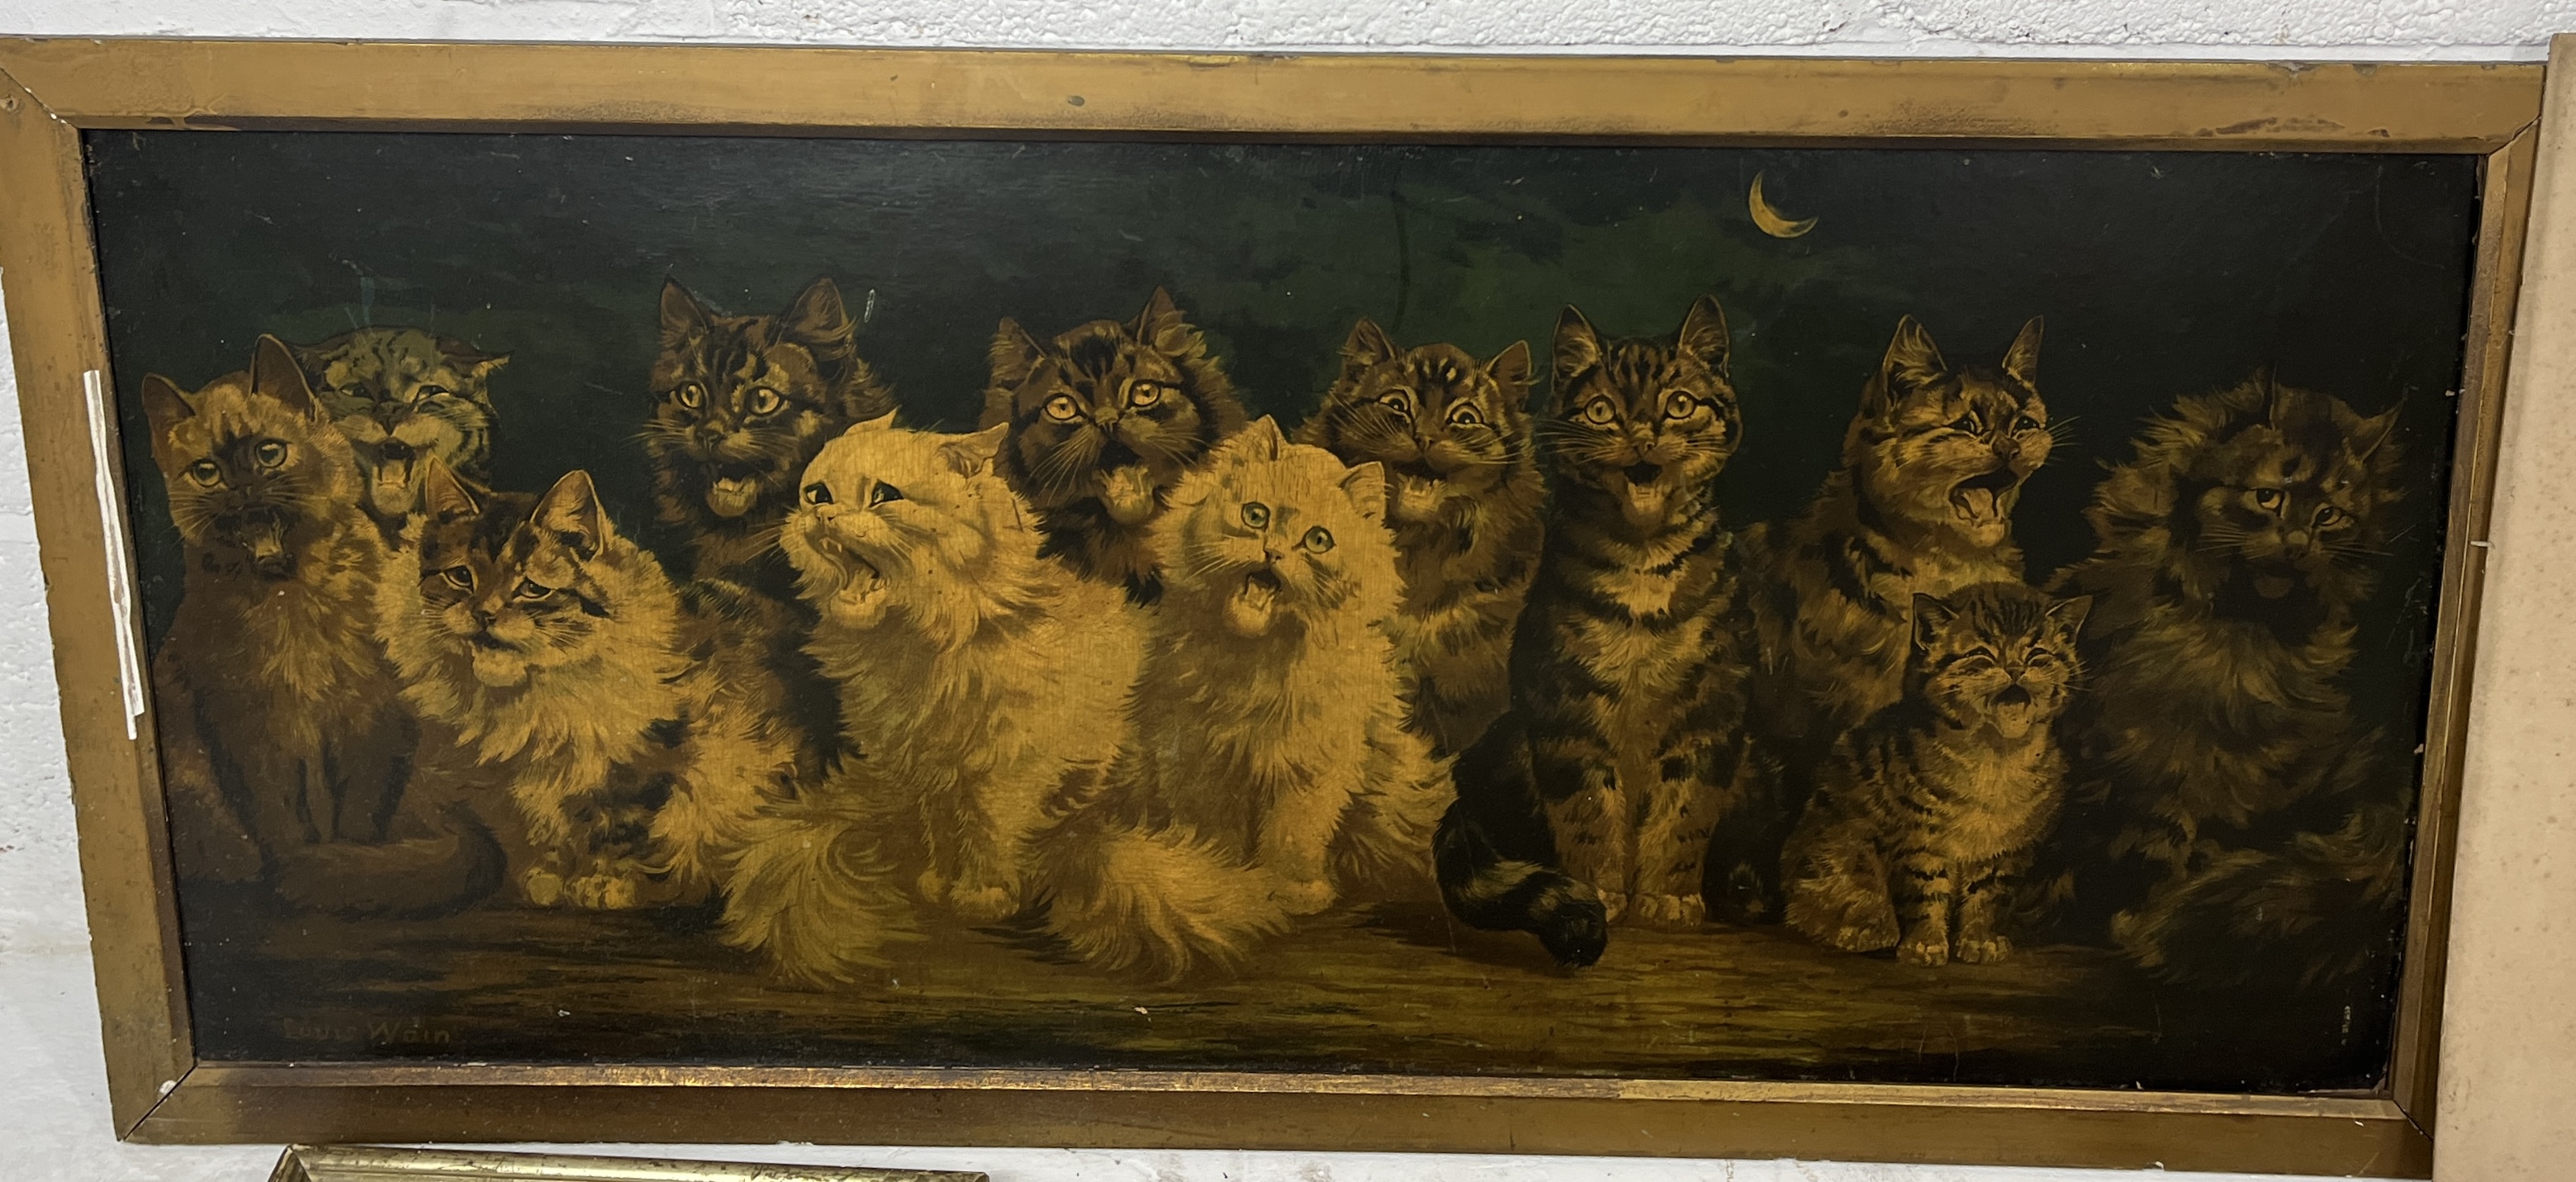 A large collection of pictures on the subject of cats including Louis Wain Oleograph print "Cats - Image 6 of 6